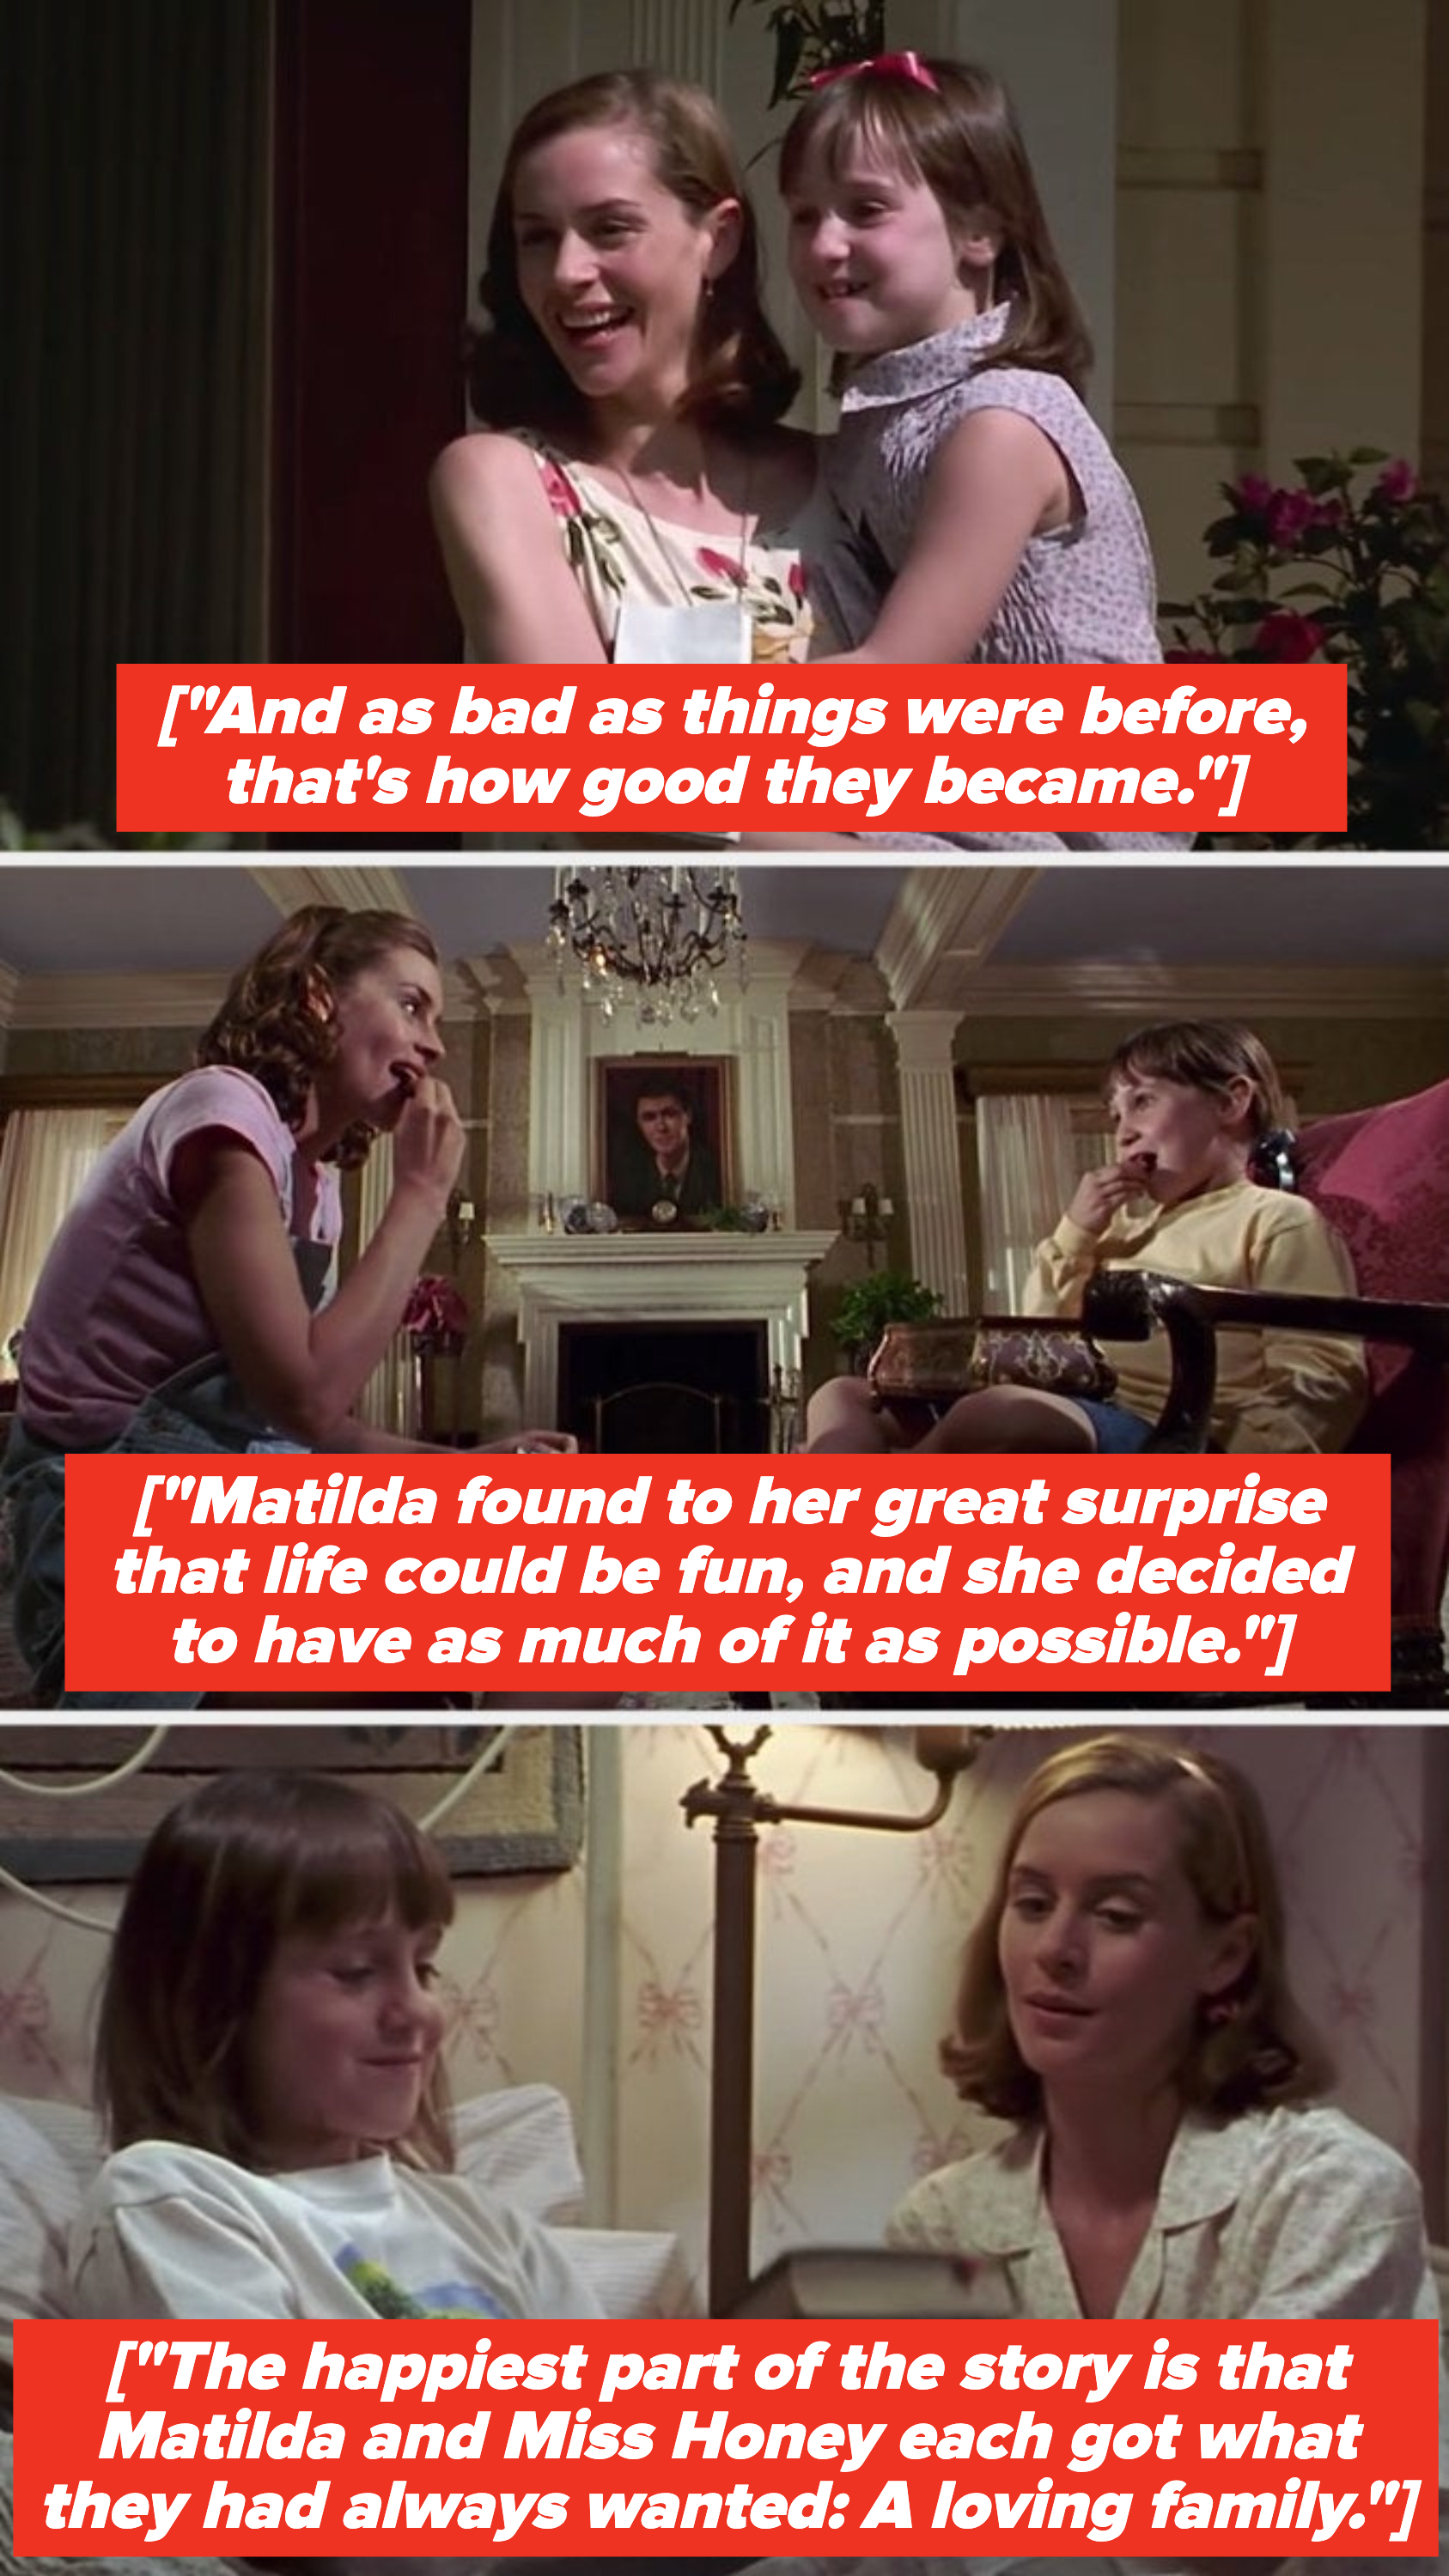 The ending montage of Miss Honey and Matilda living happily ever after, with a voice over that reads: &quot;Matilda found to her great surprise that life could be fun, and she decided to have as much of it as possible&quot;